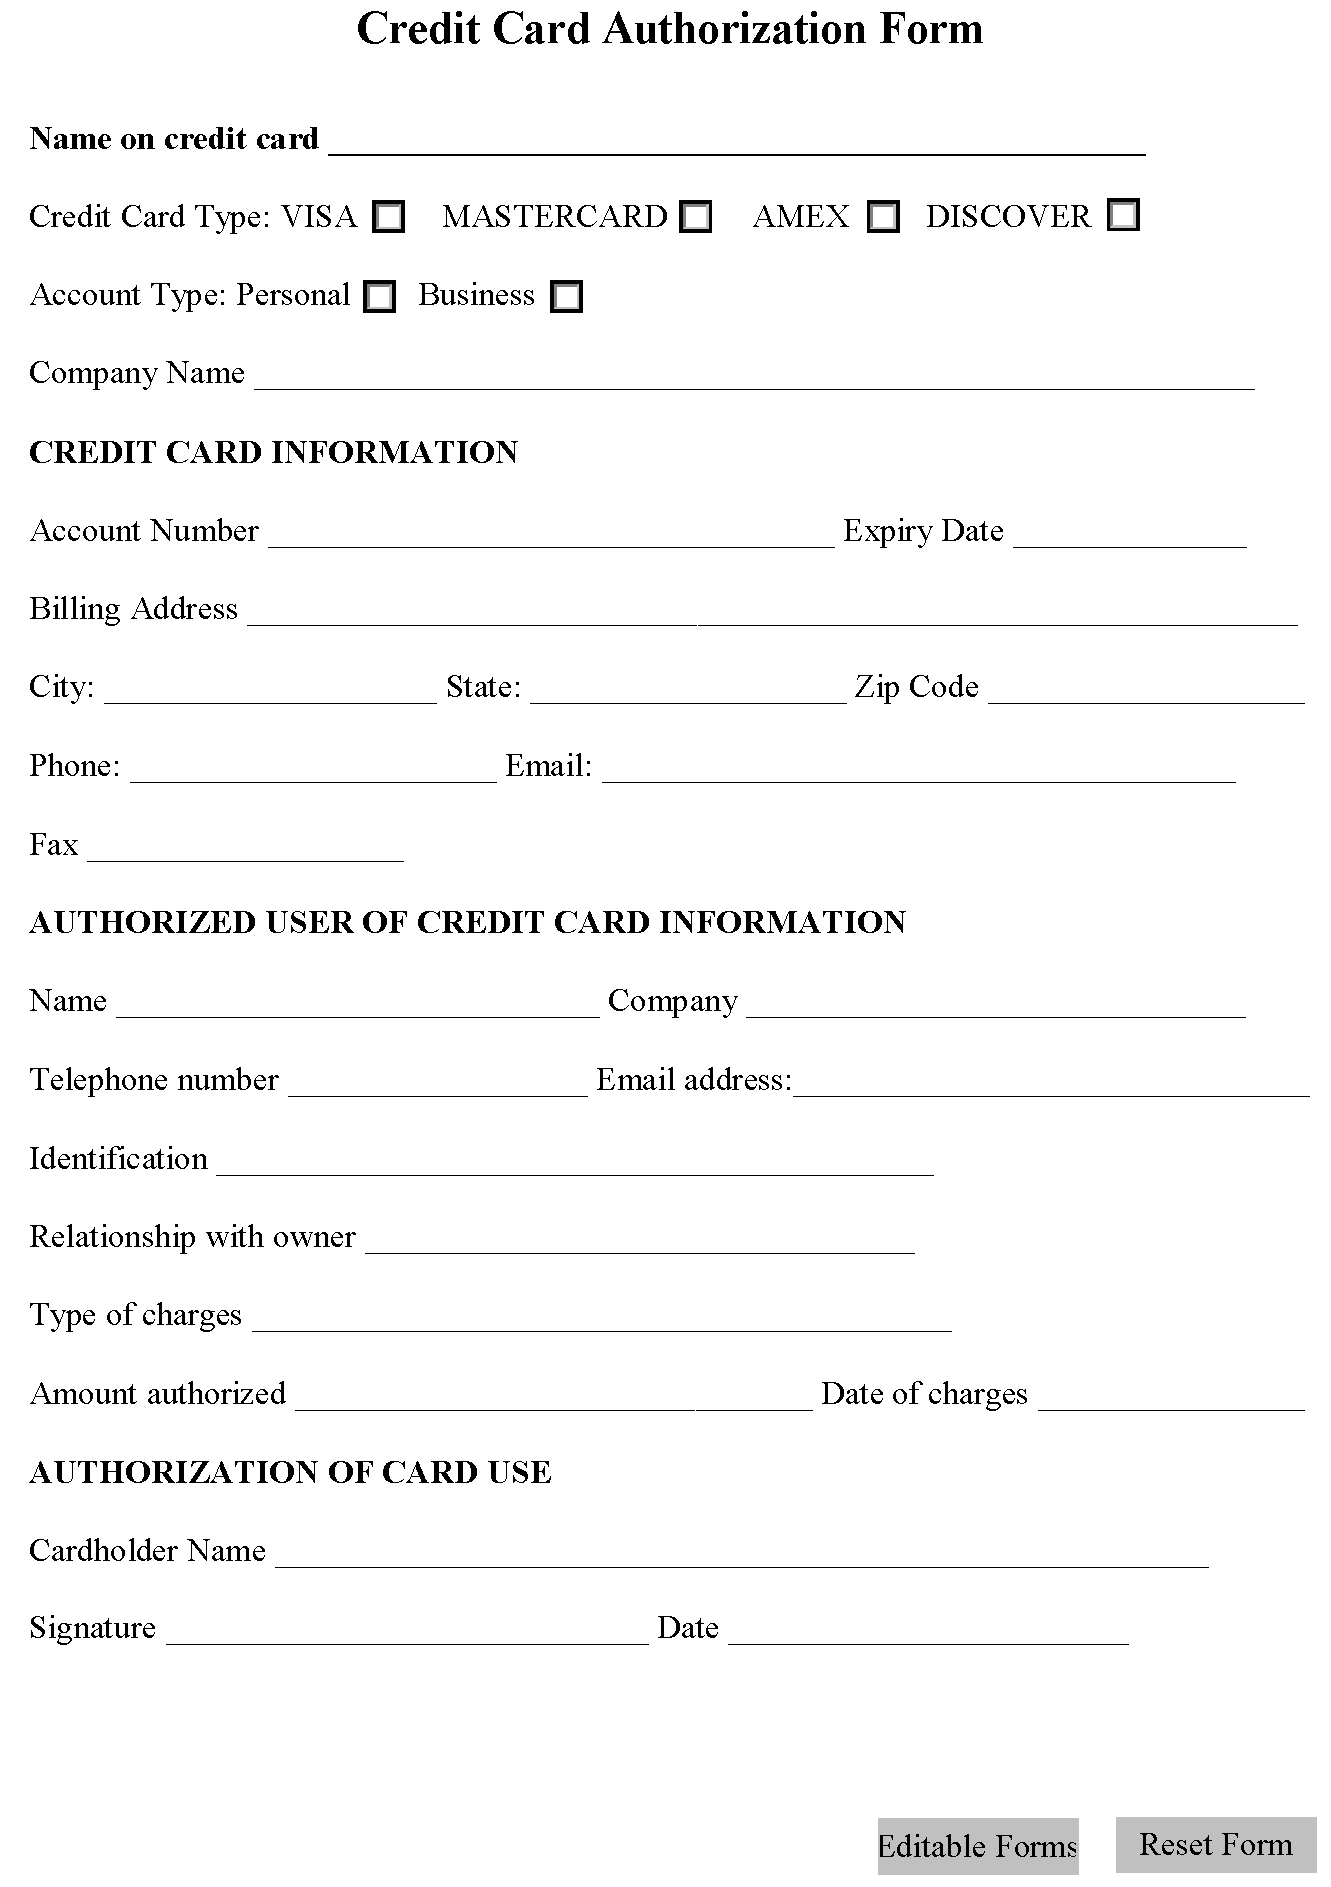 Credit Card Authorization Form | Editable Forms Regarding Credit Card Authorization Form Template Word